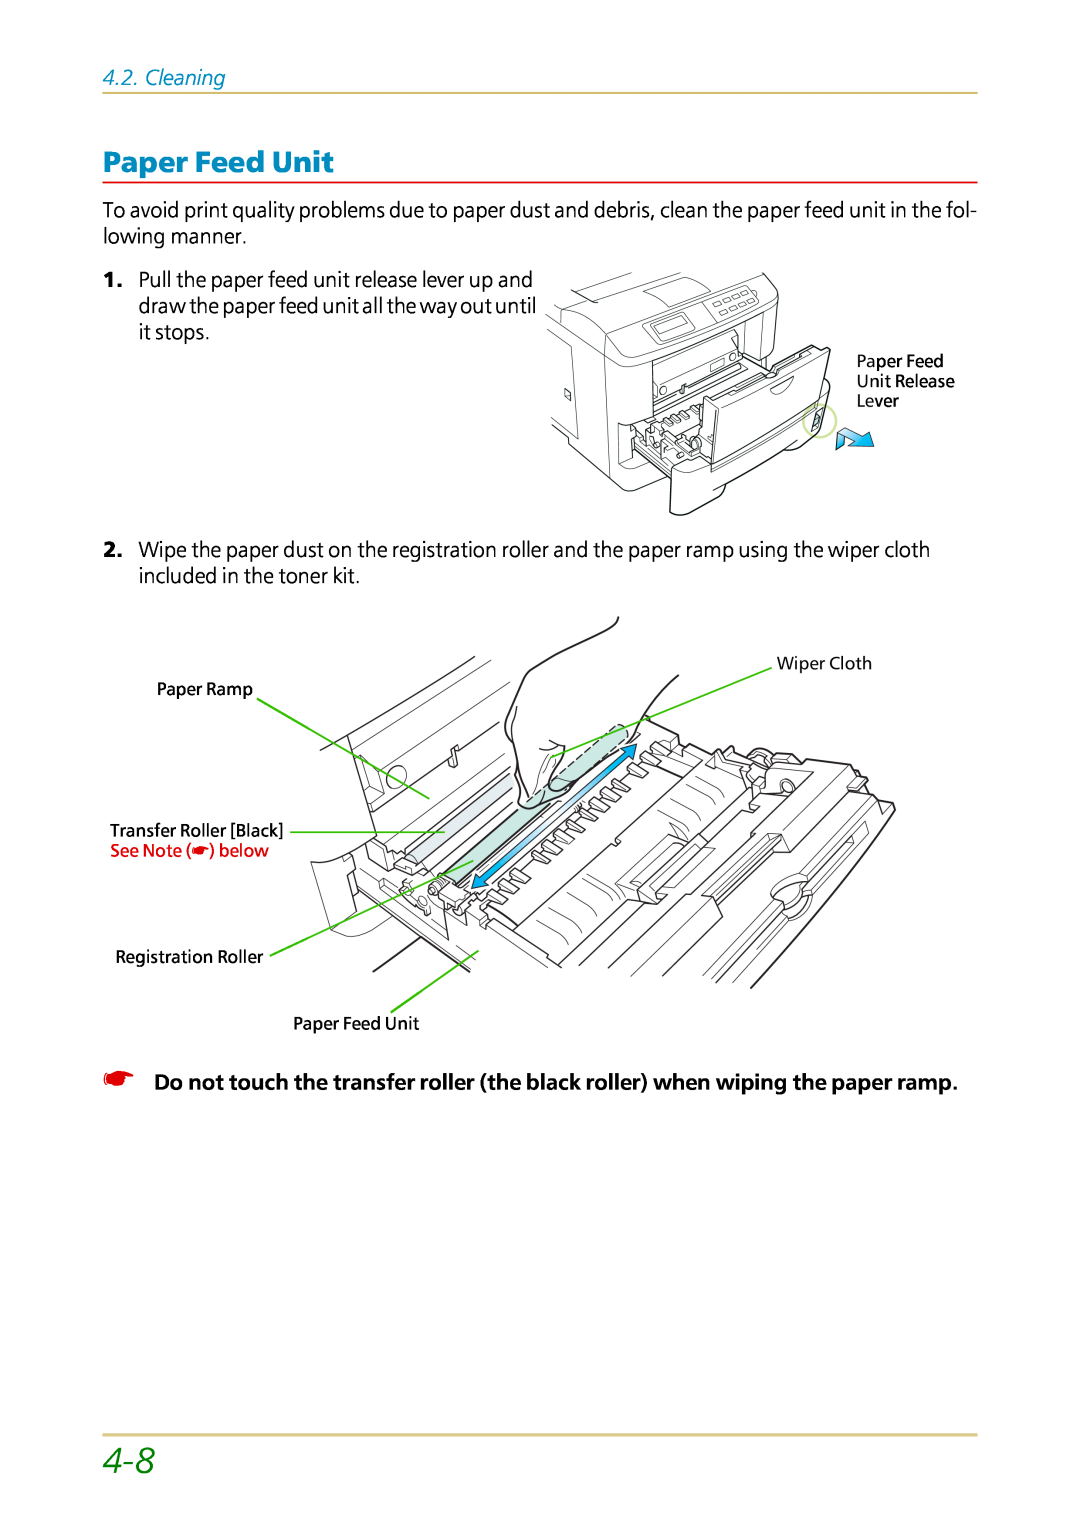 Kyocera FS-1700 user manual Paper Feed Unit, Cleaning 